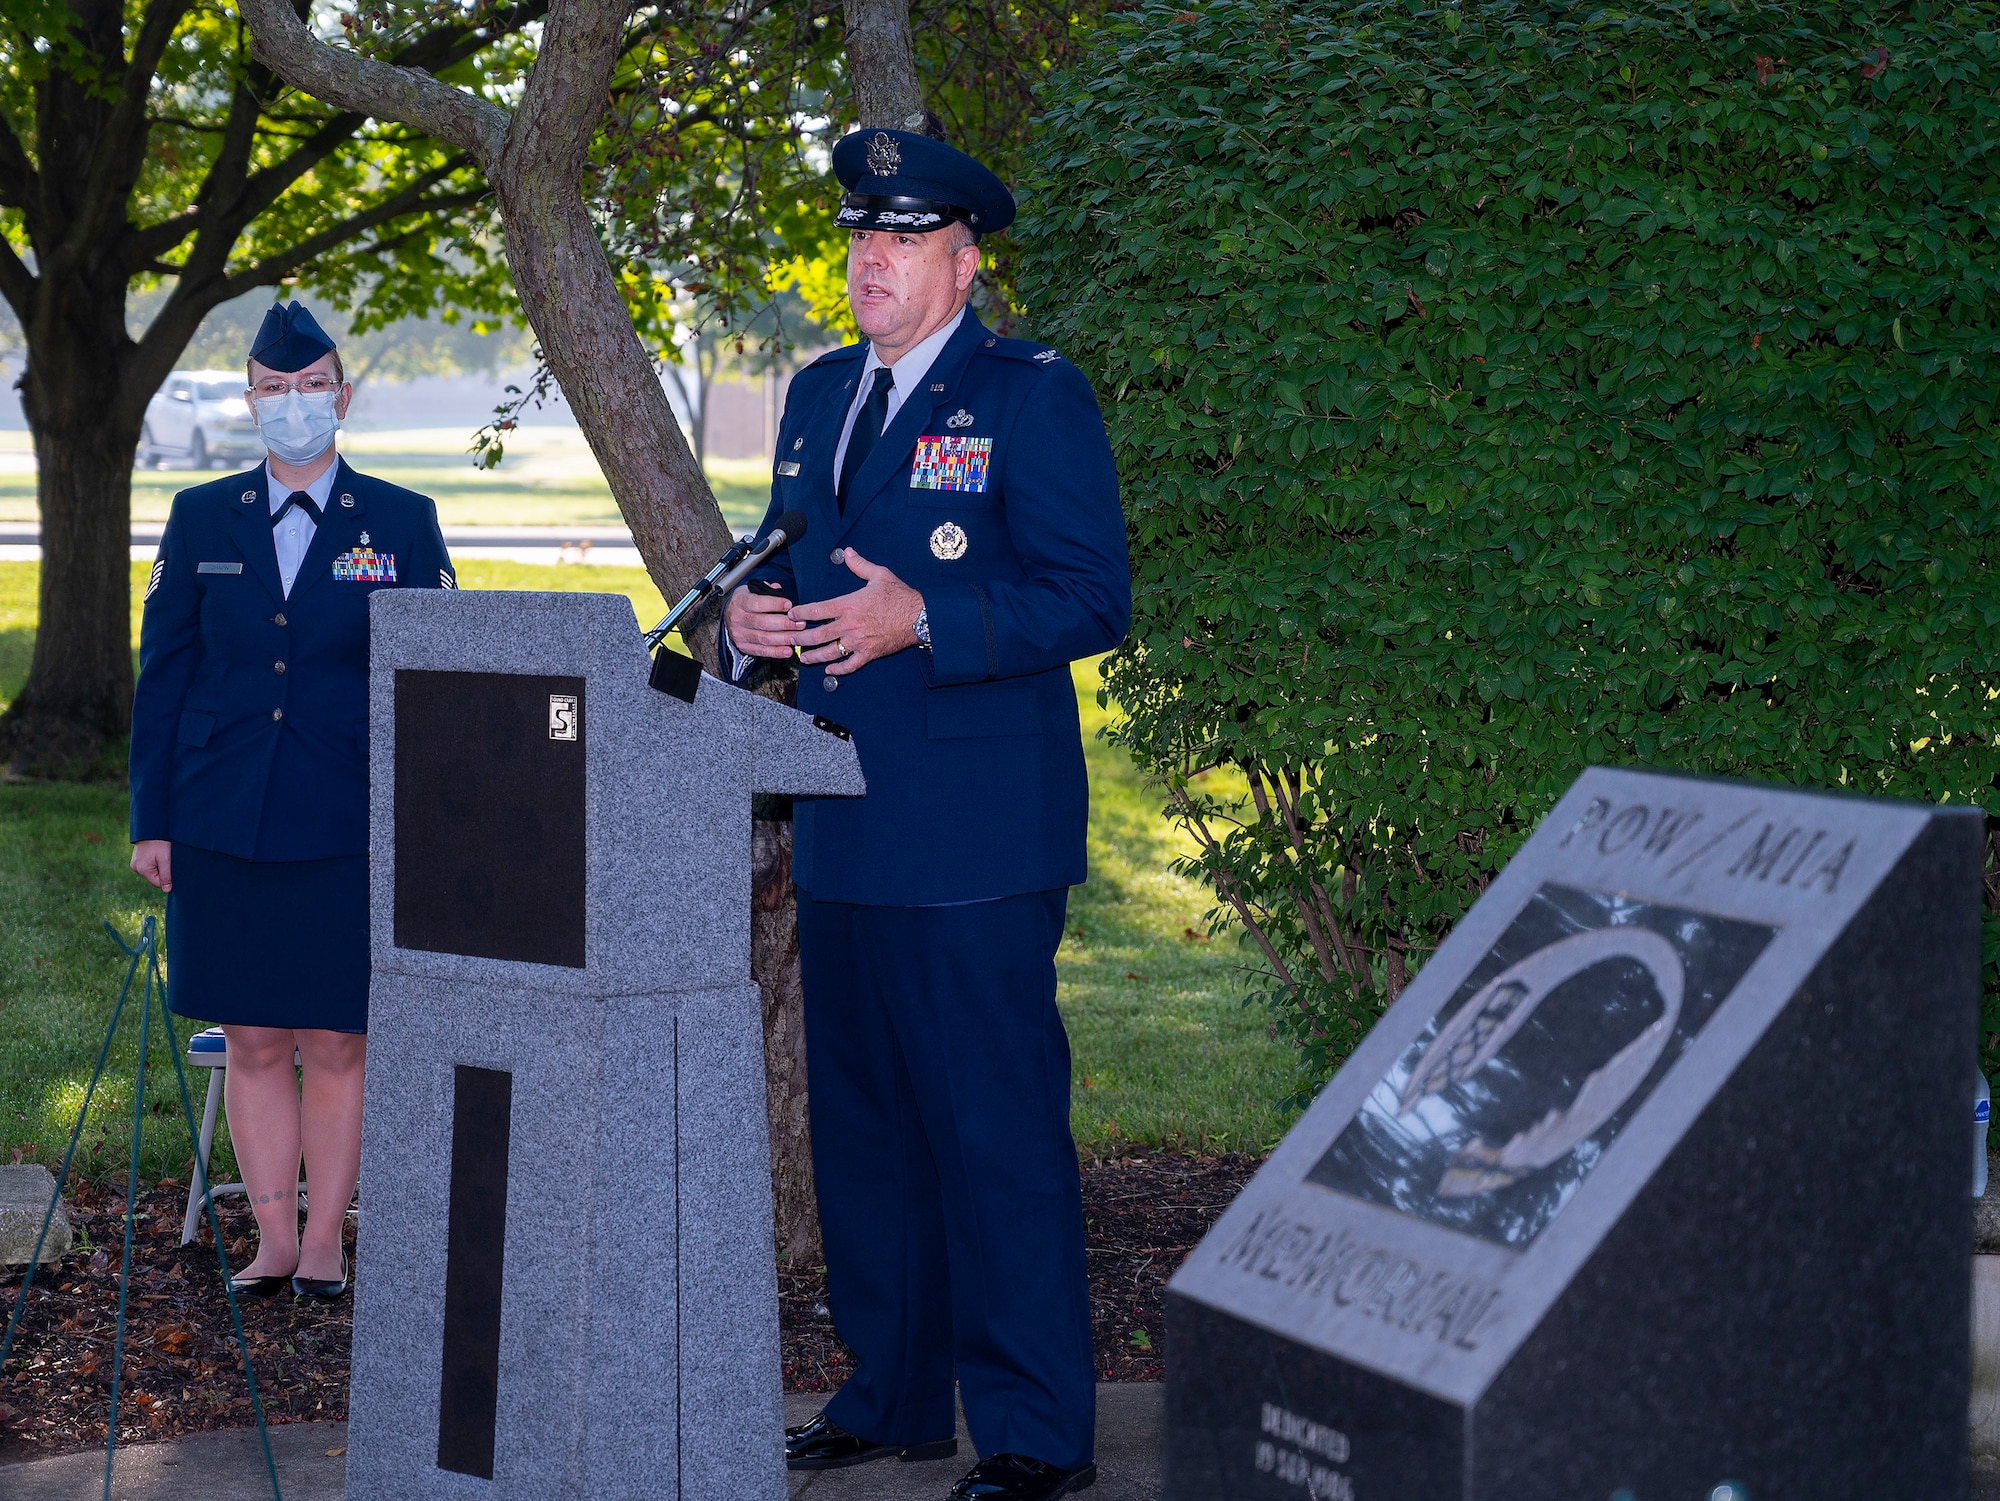 Col. Patrick Miller, 88th Air Base Wing and installation commander, makes opening remarks Sept. 17, 2021,, during the POW/MIA Recognition Day wreath-laying ceremony at Wright-Patterson Air Force Base, Ohio. The annual event included a former Air Force officer and fighter pilot talking about his experience in North Vietnamese prison camps and a wreath laying. (U.S. Air Force photo by R.J. Oriez)